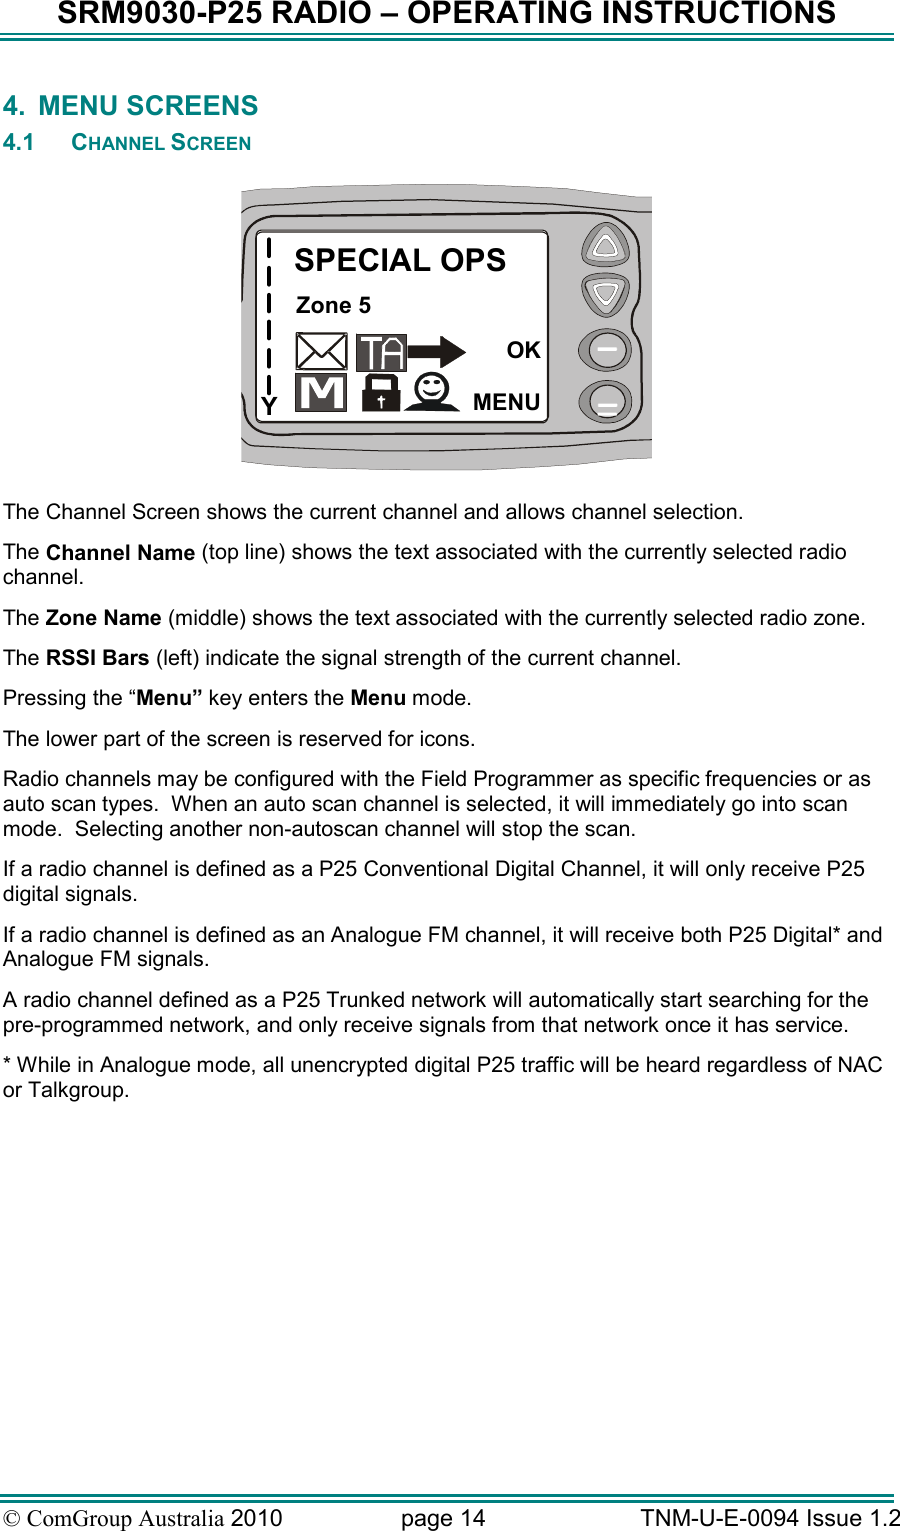 SRM9030-P25 RADIO – OPERATING INSTRUCTIONS © ComGroup Australia 2010  page 14   TNM-U-E-0094 Issue 1.2 4.  MENU SCREENS 4.1  CHANNEL SCREEN  YSPECIAL OPSZone 5OKMENU  The Channel Screen shows the current channel and allows channel selection.   The Channel Name (top line) shows the text associated with the currently selected radio channel. The Zone Name (middle) shows the text associated with the currently selected radio zone. The RSSI Bars (left) indicate the signal strength of the current channel. Pressing the “Menu” key enters the Menu mode. The lower part of the screen is reserved for icons. Radio channels may be configured with the Field Programmer as specific frequencies or as auto scan types.  When an auto scan channel is selected, it will immediately go into scan mode.  Selecting another non-autoscan channel will stop the scan. If a radio channel is defined as a P25 Conventional Digital Channel, it will only receive P25 digital signals.  If a radio channel is defined as an Analogue FM channel, it will receive both P25 Digital* and Analogue FM signals. A radio channel defined as a P25 Trunked network will automatically start searching for the pre-programmed network, and only receive signals from that network once it has service. * While in Analogue mode, all unencrypted digital P25 traffic will be heard regardless of NAC or Talkgroup.   